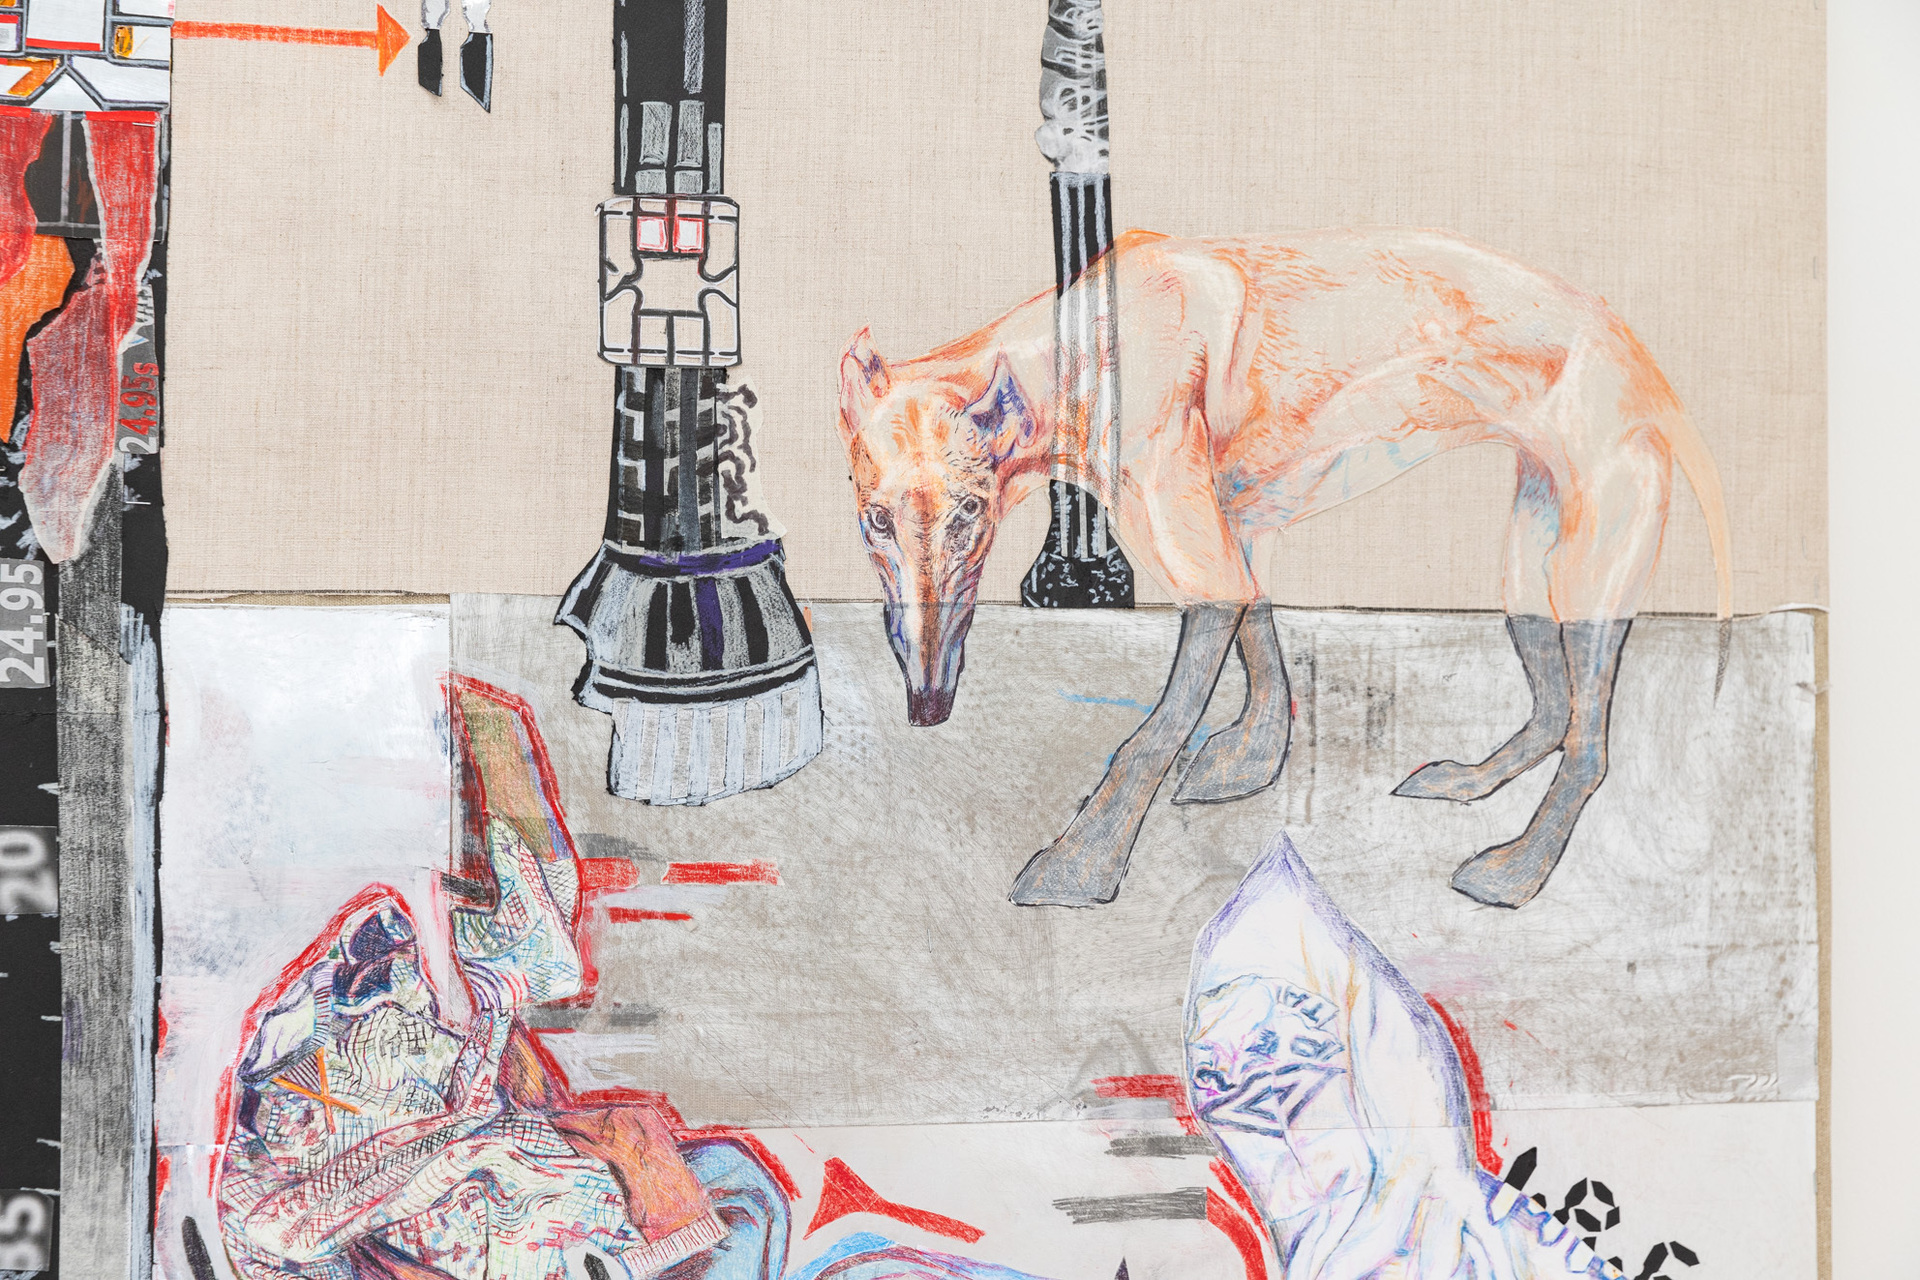 Anna Solal, "Clothes", 2022 (detail), drawing, mixed media on wood, 119 x 234 x 6 cm